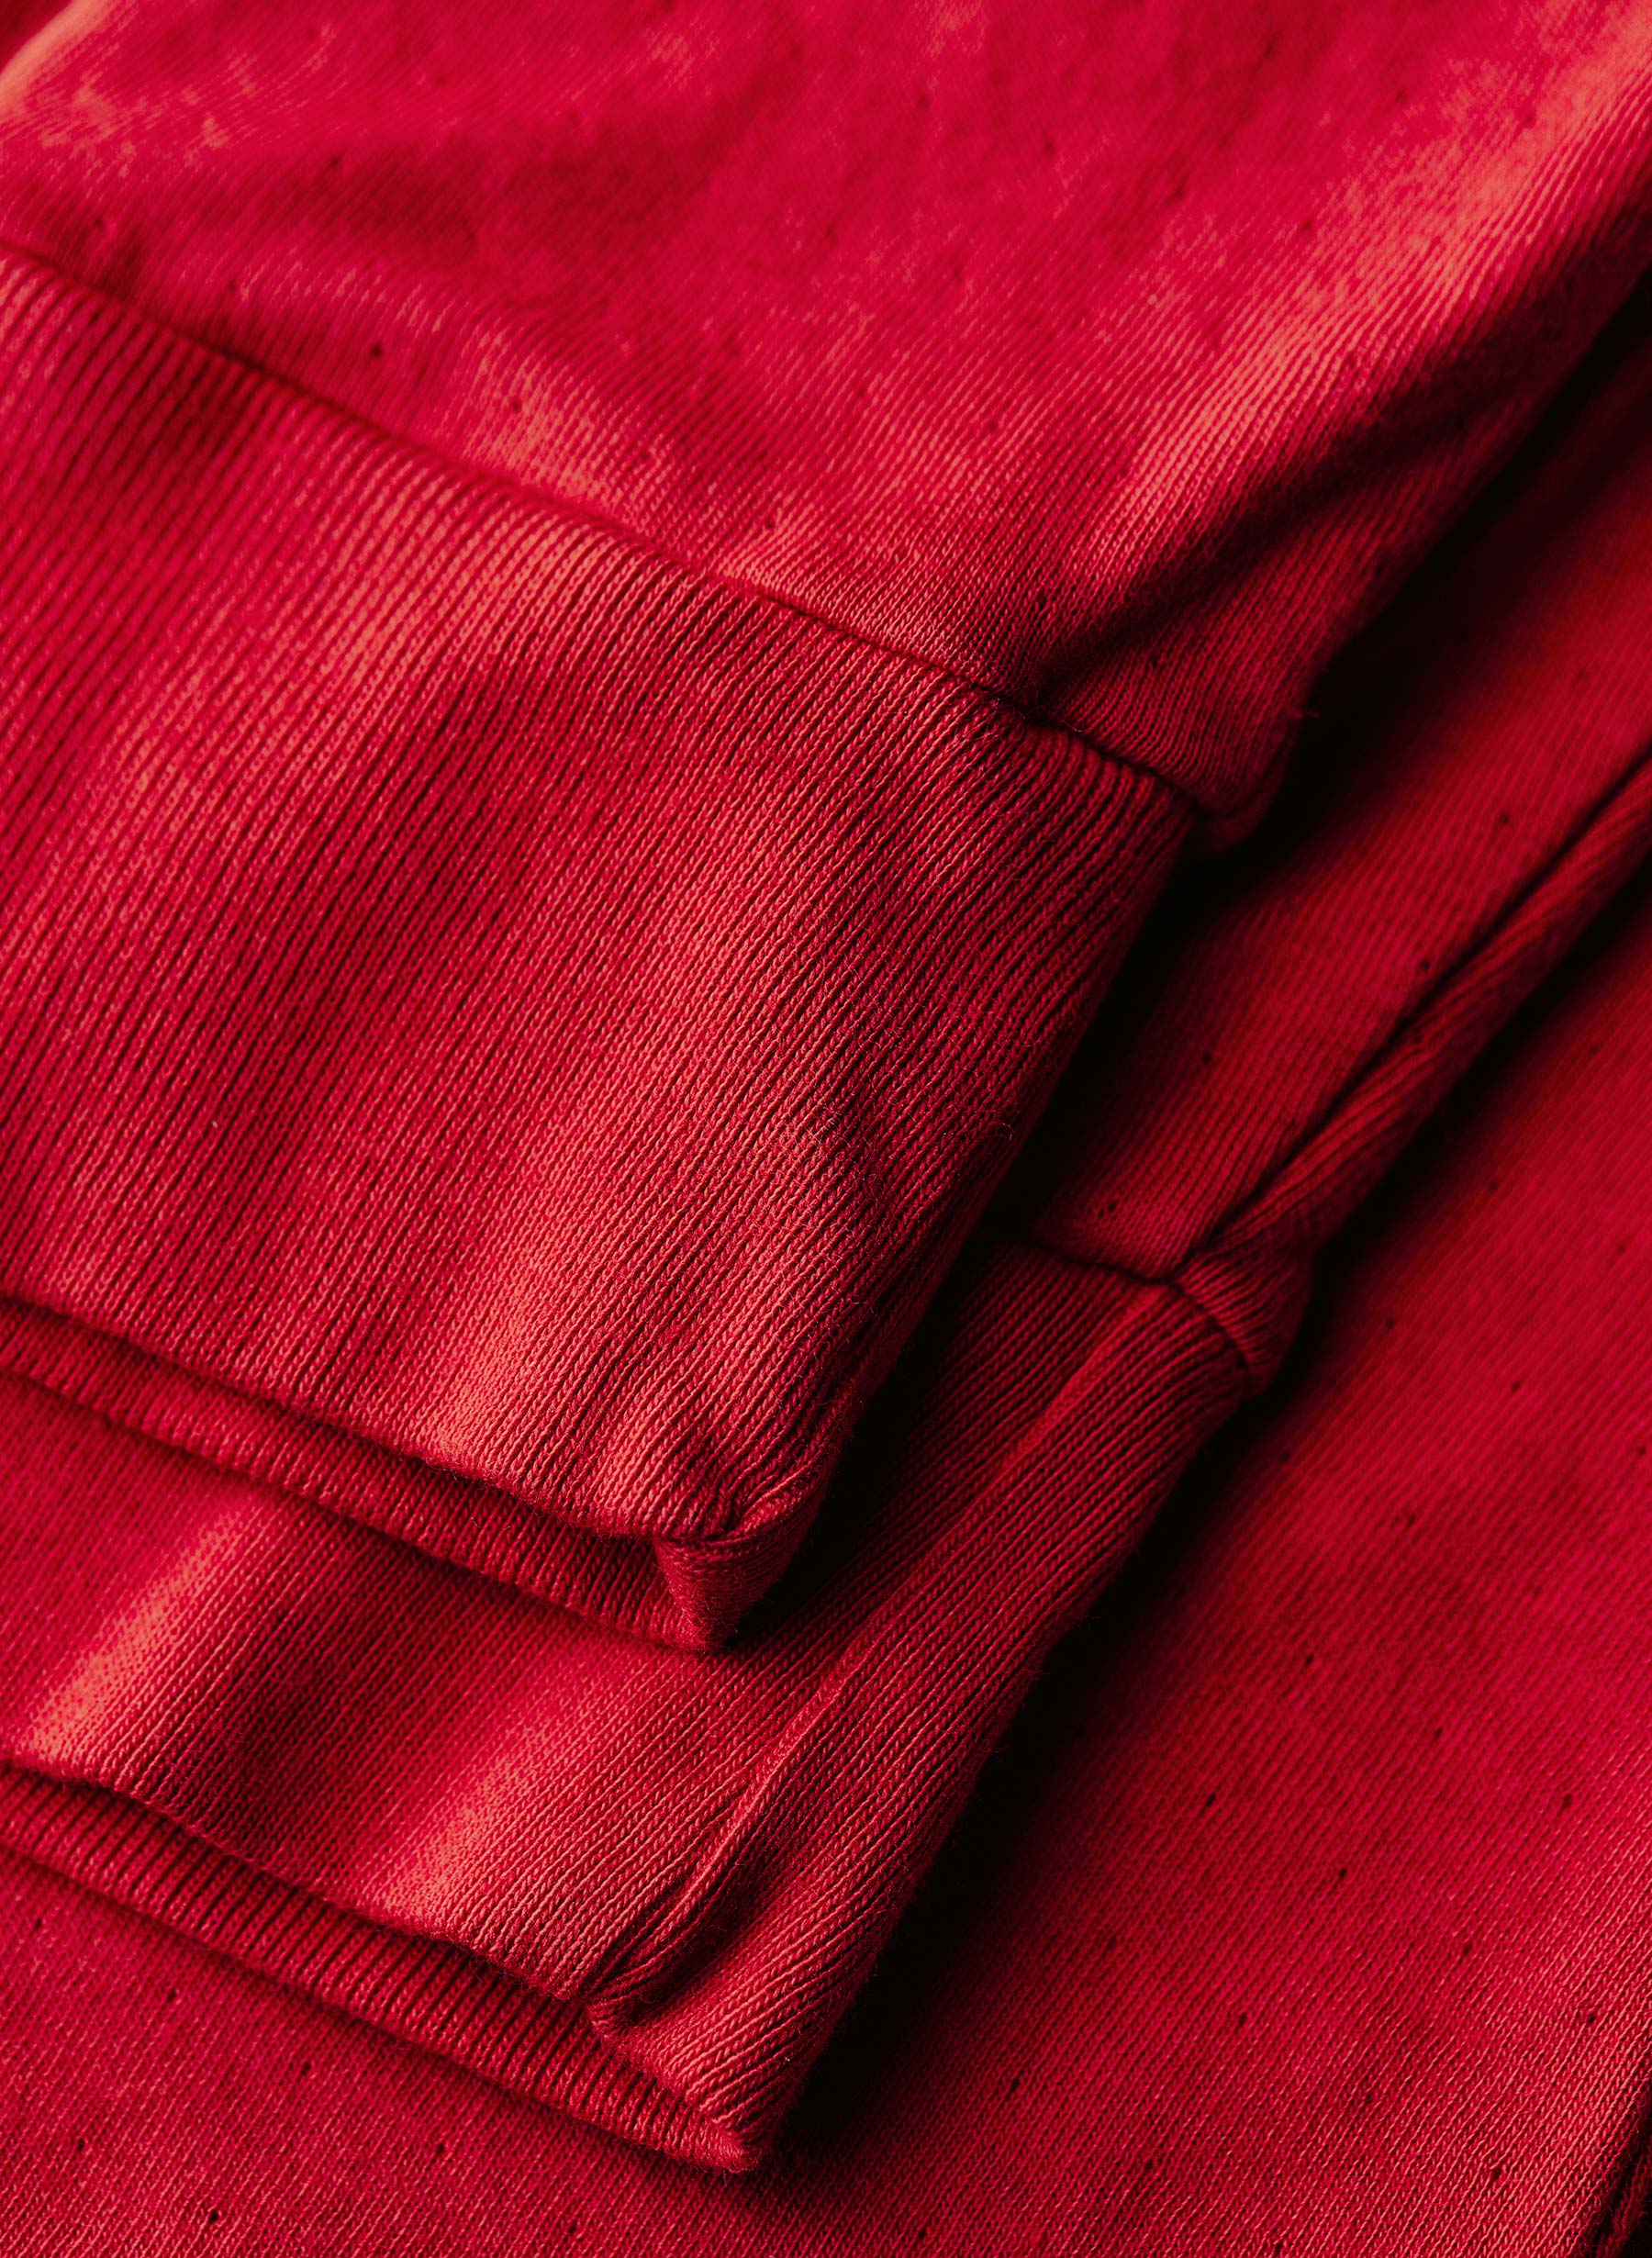 Outerwear, Textile, Sleeve, Pink, Collar, Red, Material property, Magenta, Tints and shades, Pattern